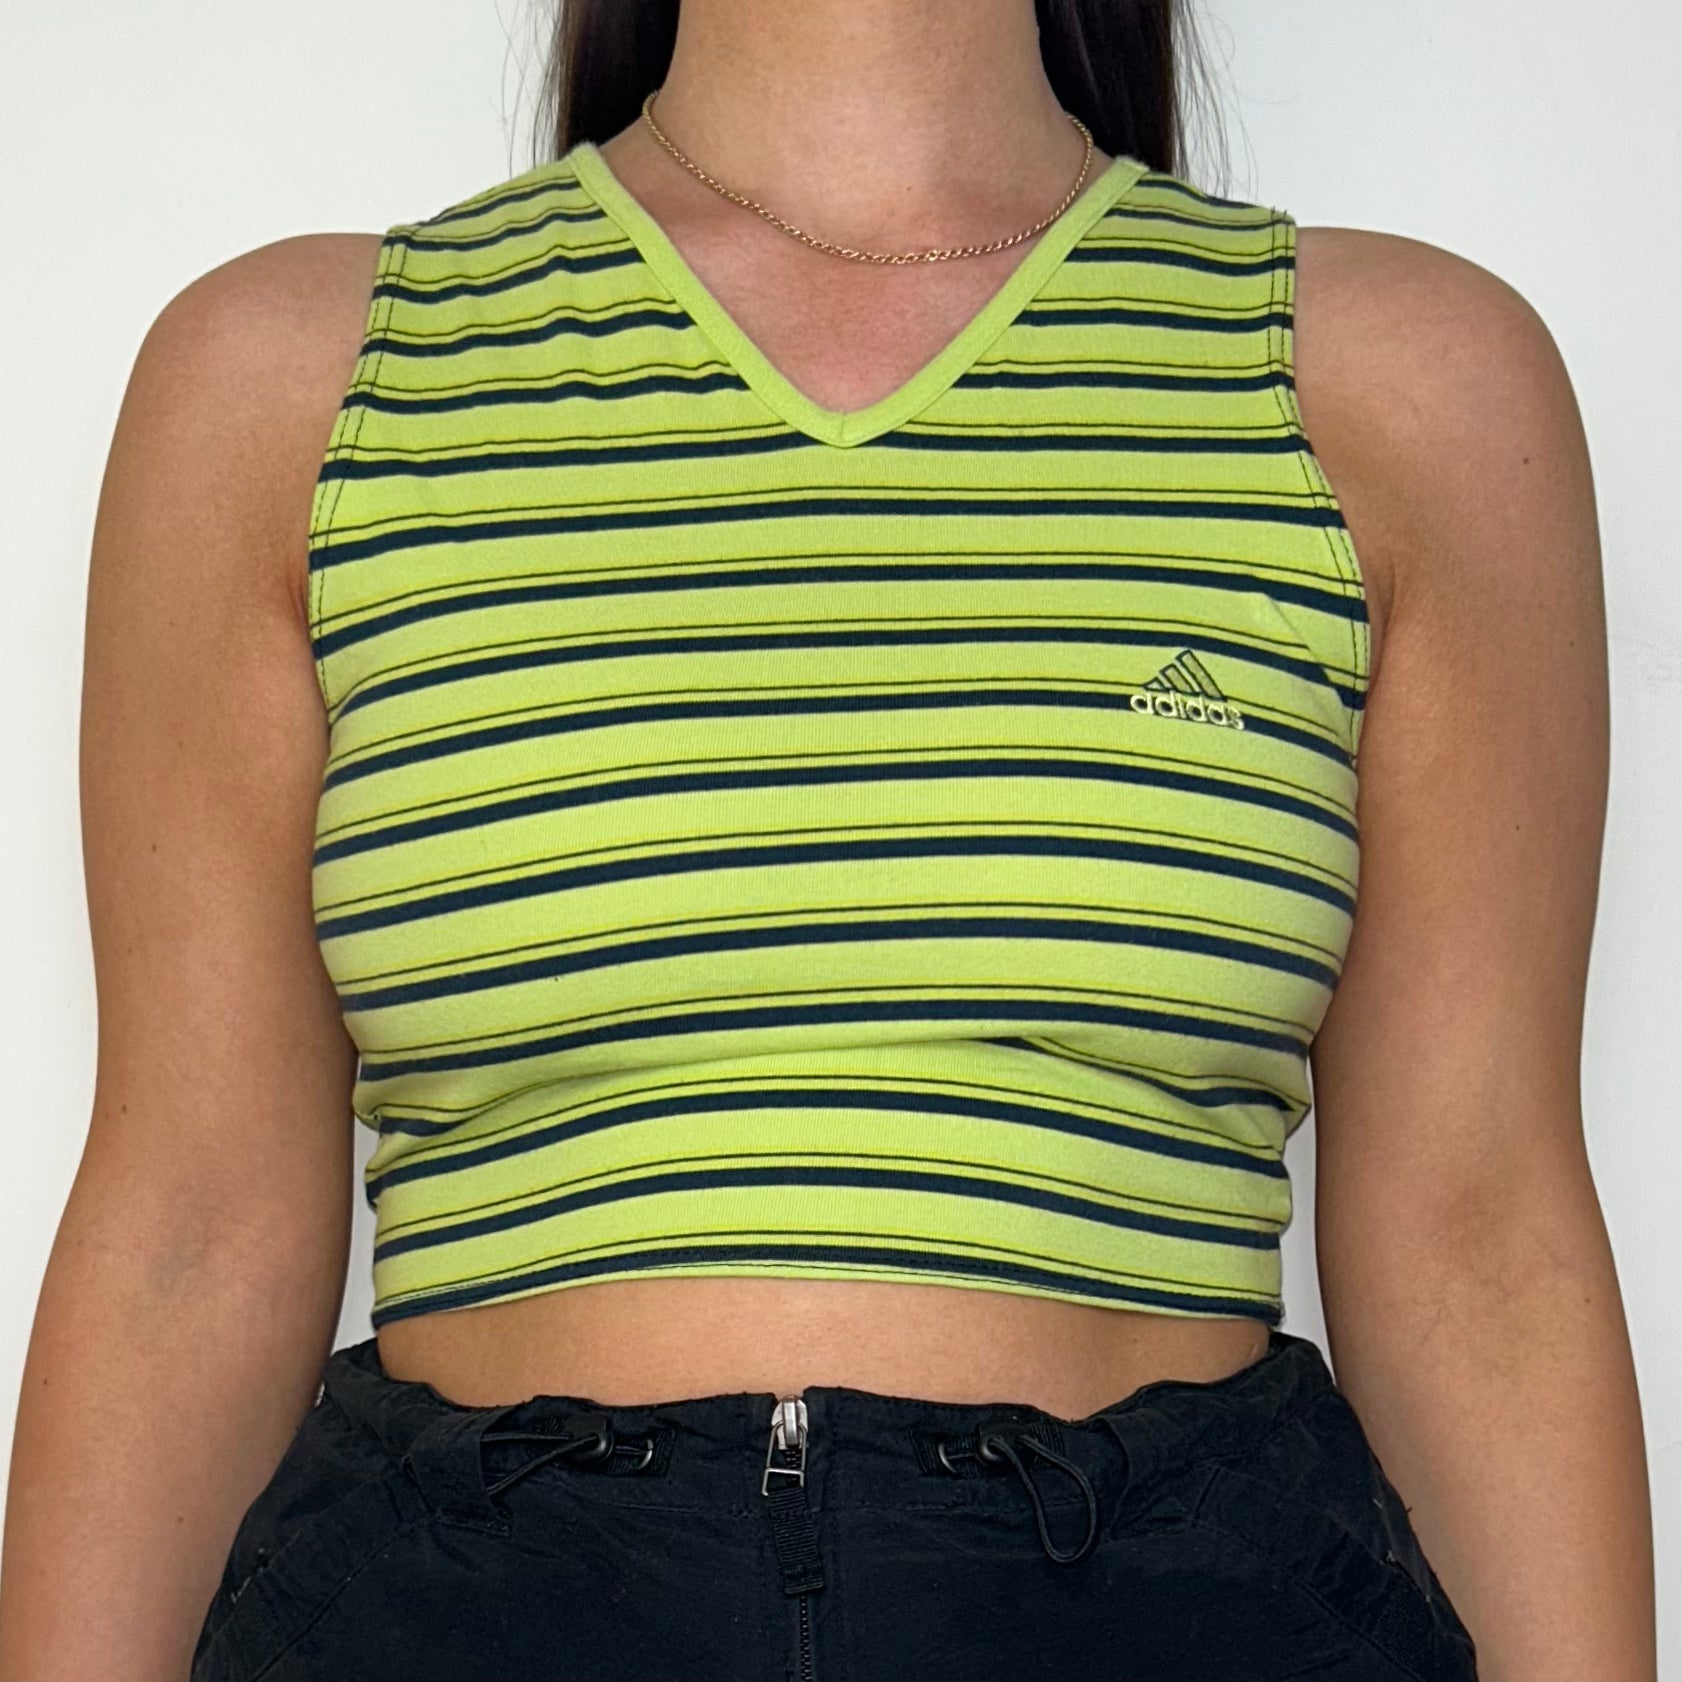 green and black sleeveless crop top with small adidas logo shown on a model